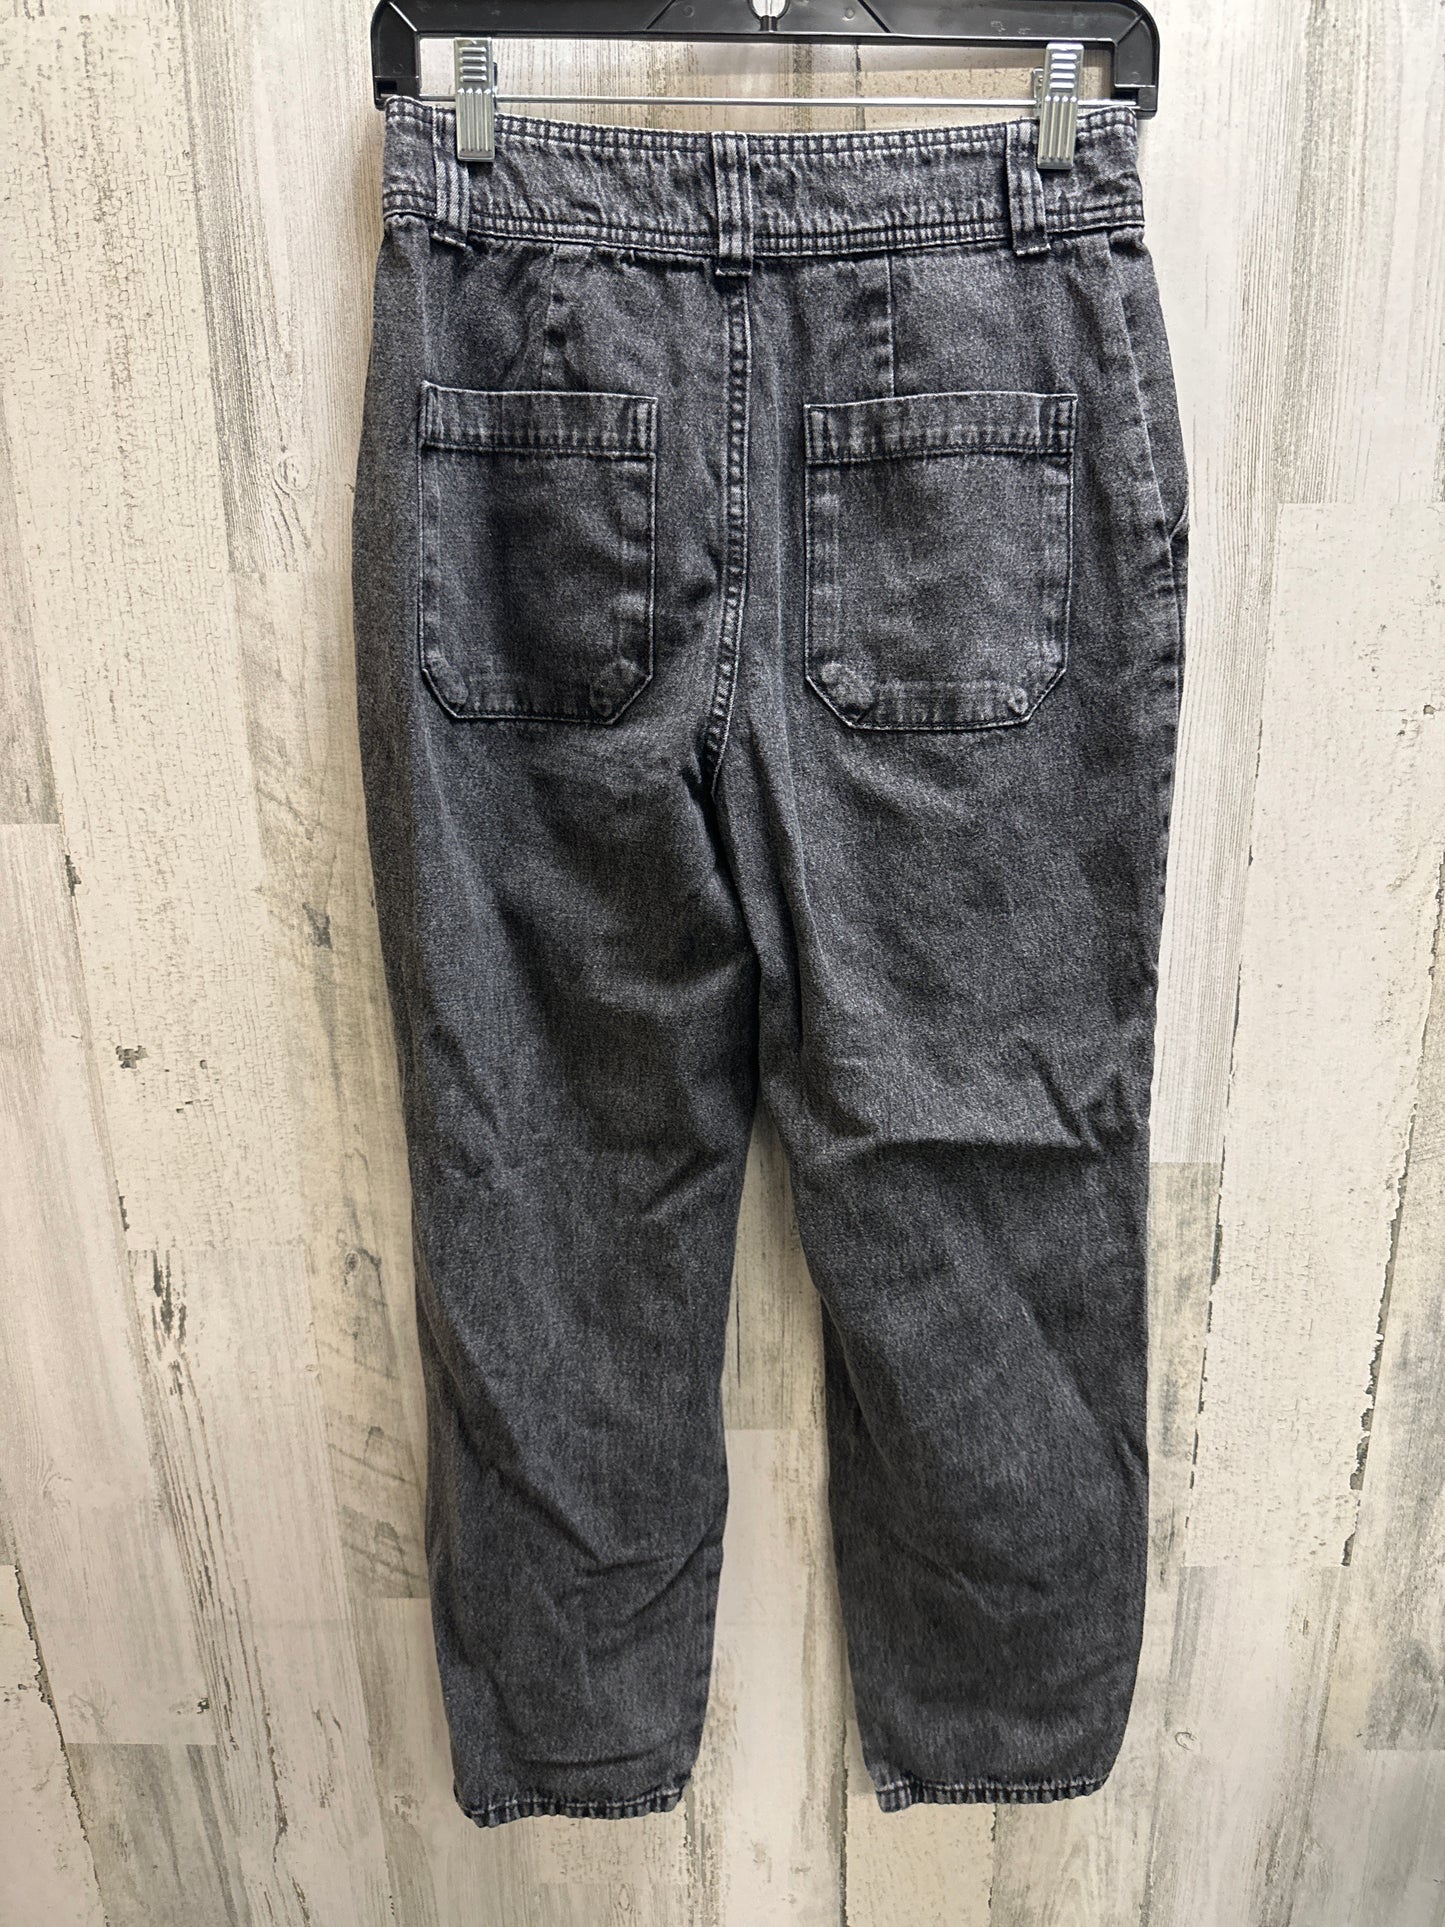 Jeans Relaxed/boyfriend By Who What Wear  Size: 2